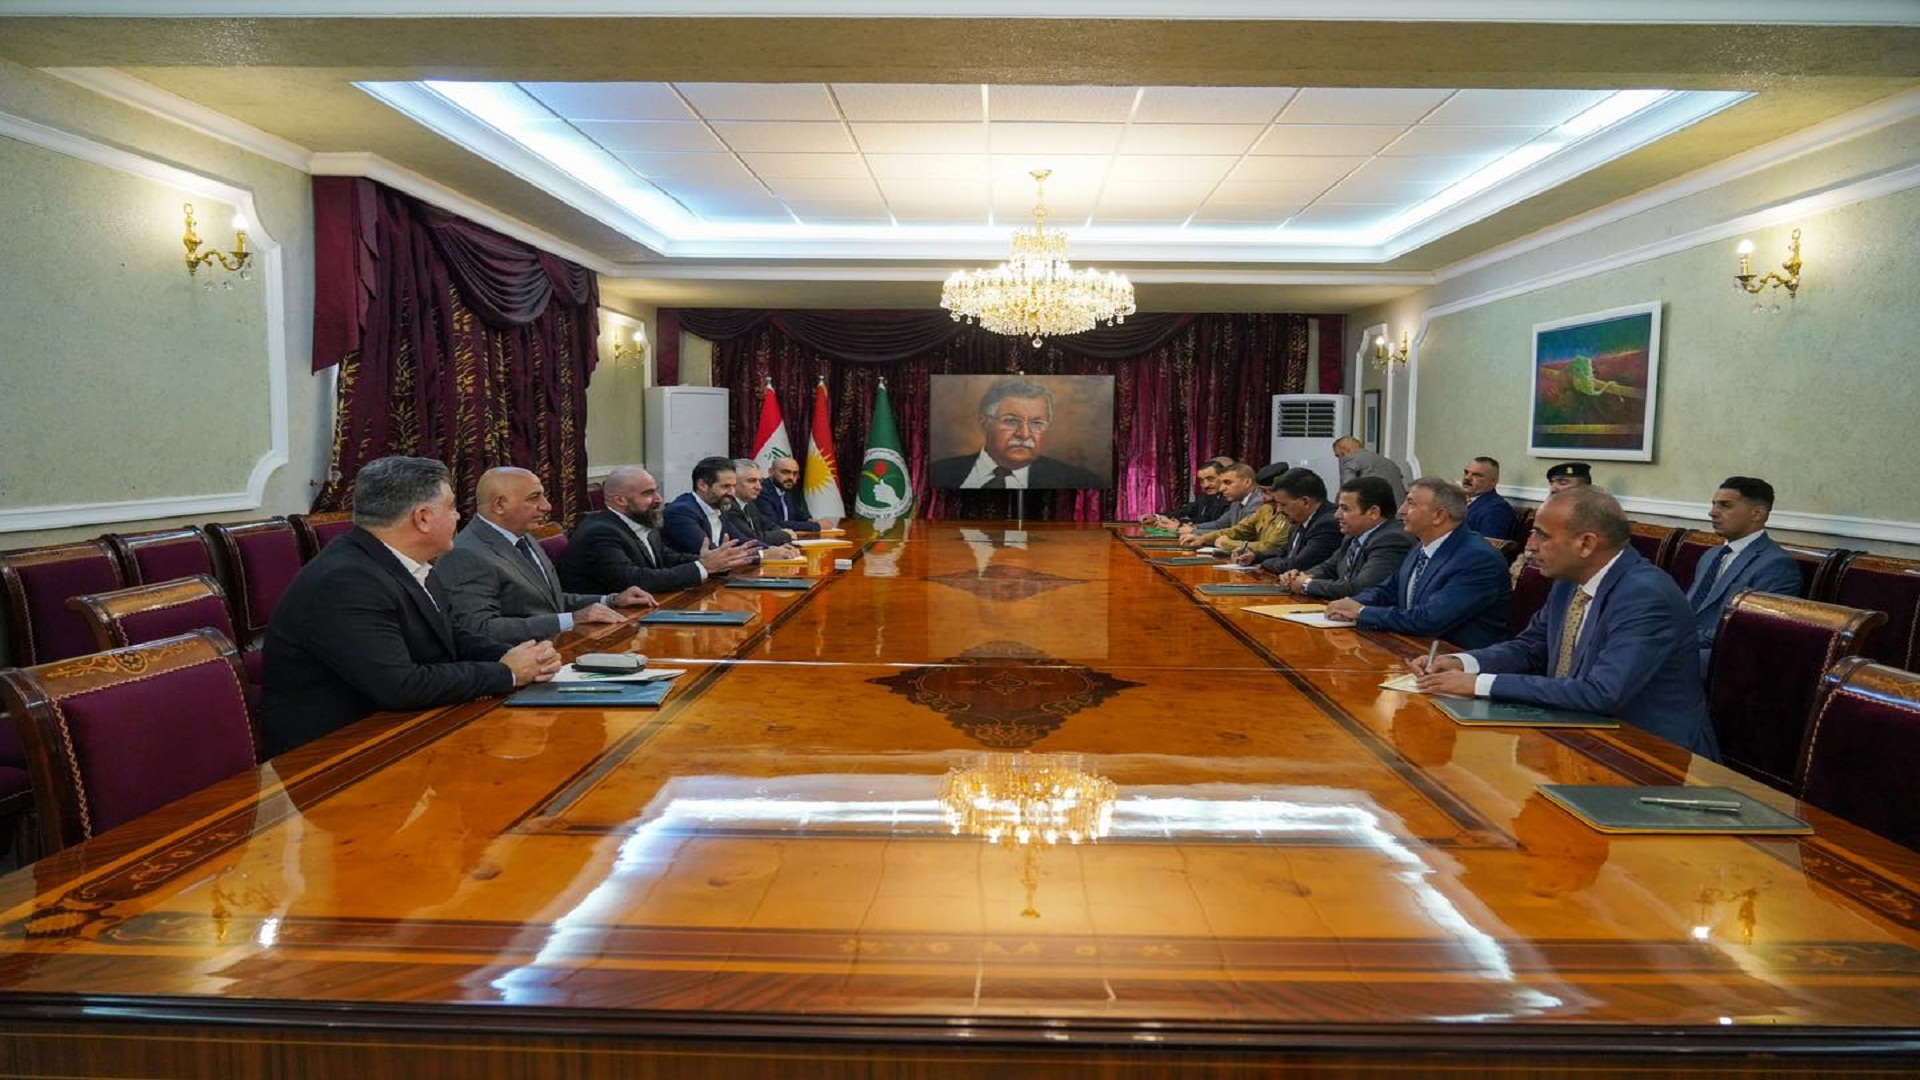  President Bafel's meeting with the security agencies.